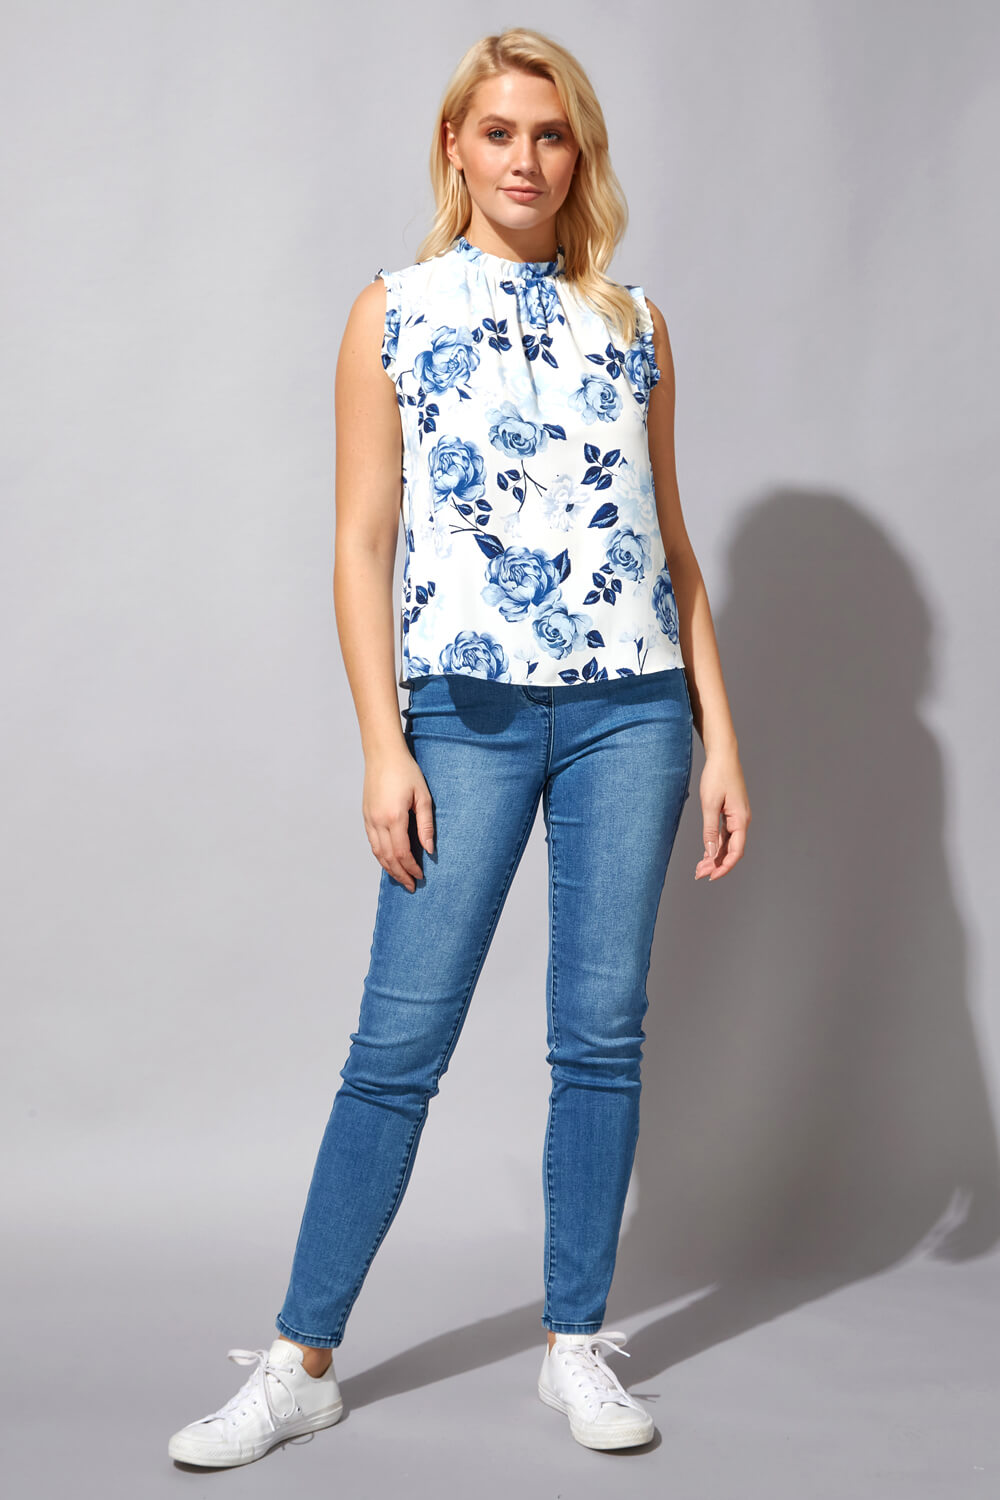 Blue Floral Frill Detail Top, Image 2 of 4